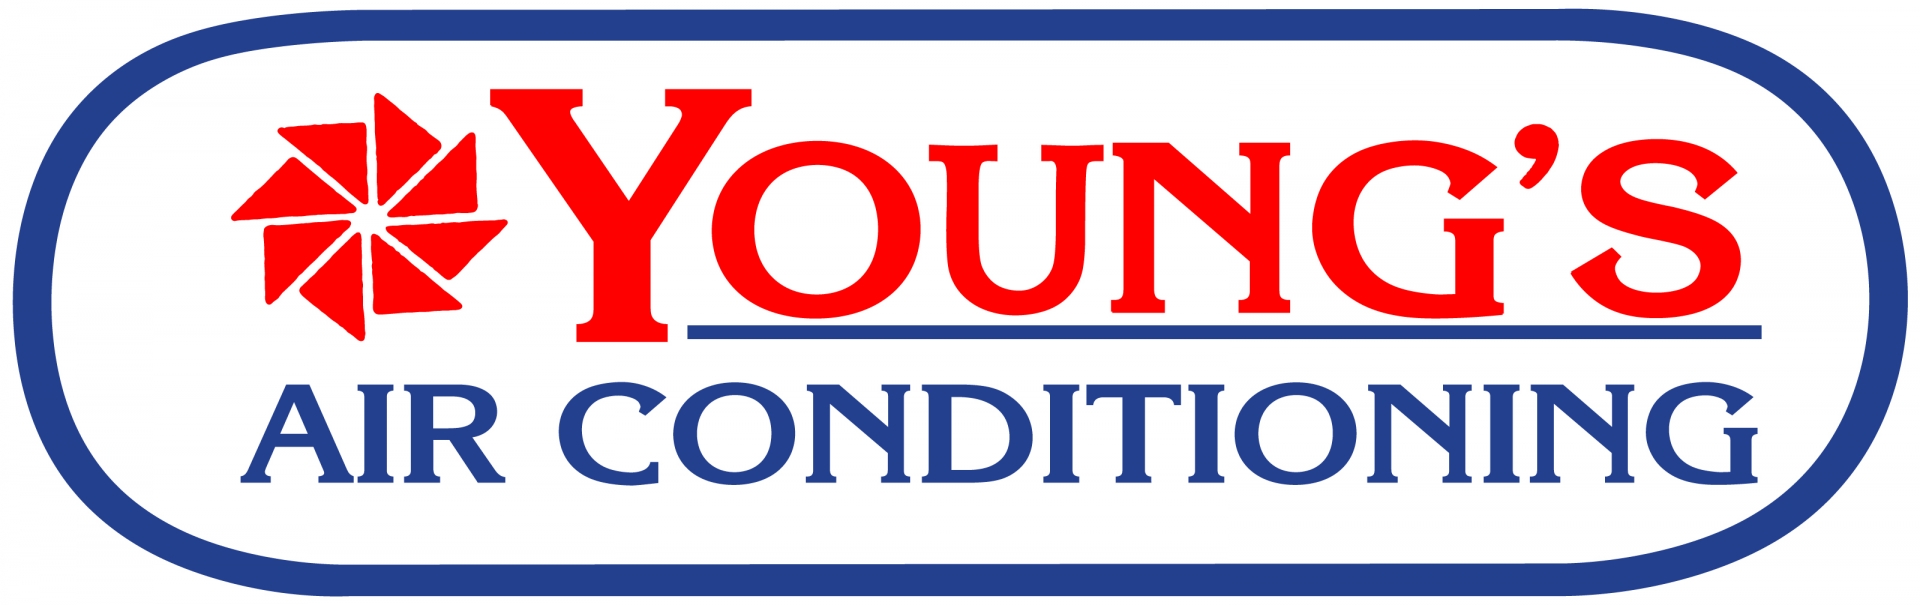 Young's Air Conditioning logo